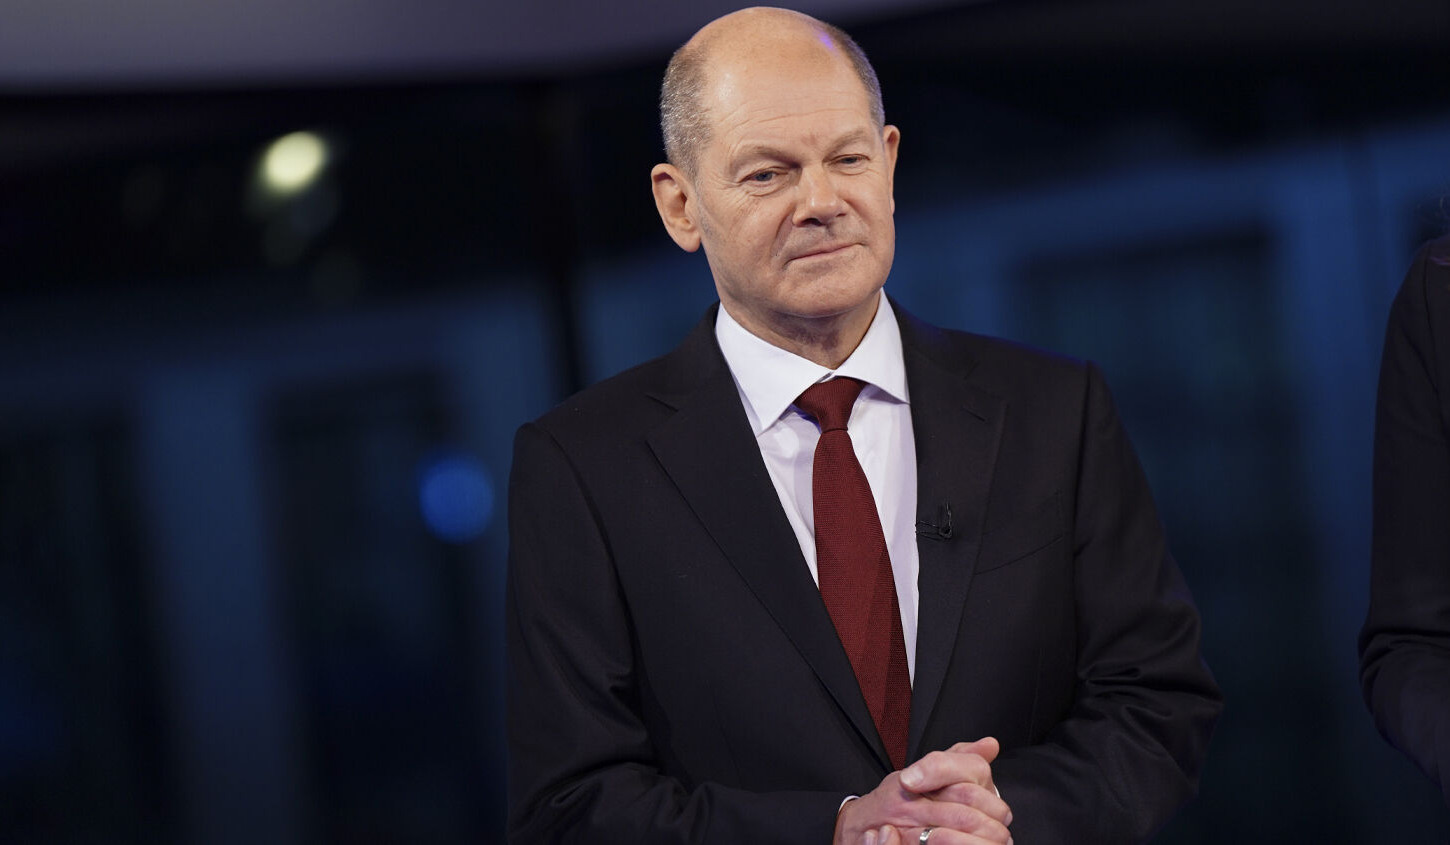 Baku must immediately stop the attacks and return to diplomacy, Olaf Scholz